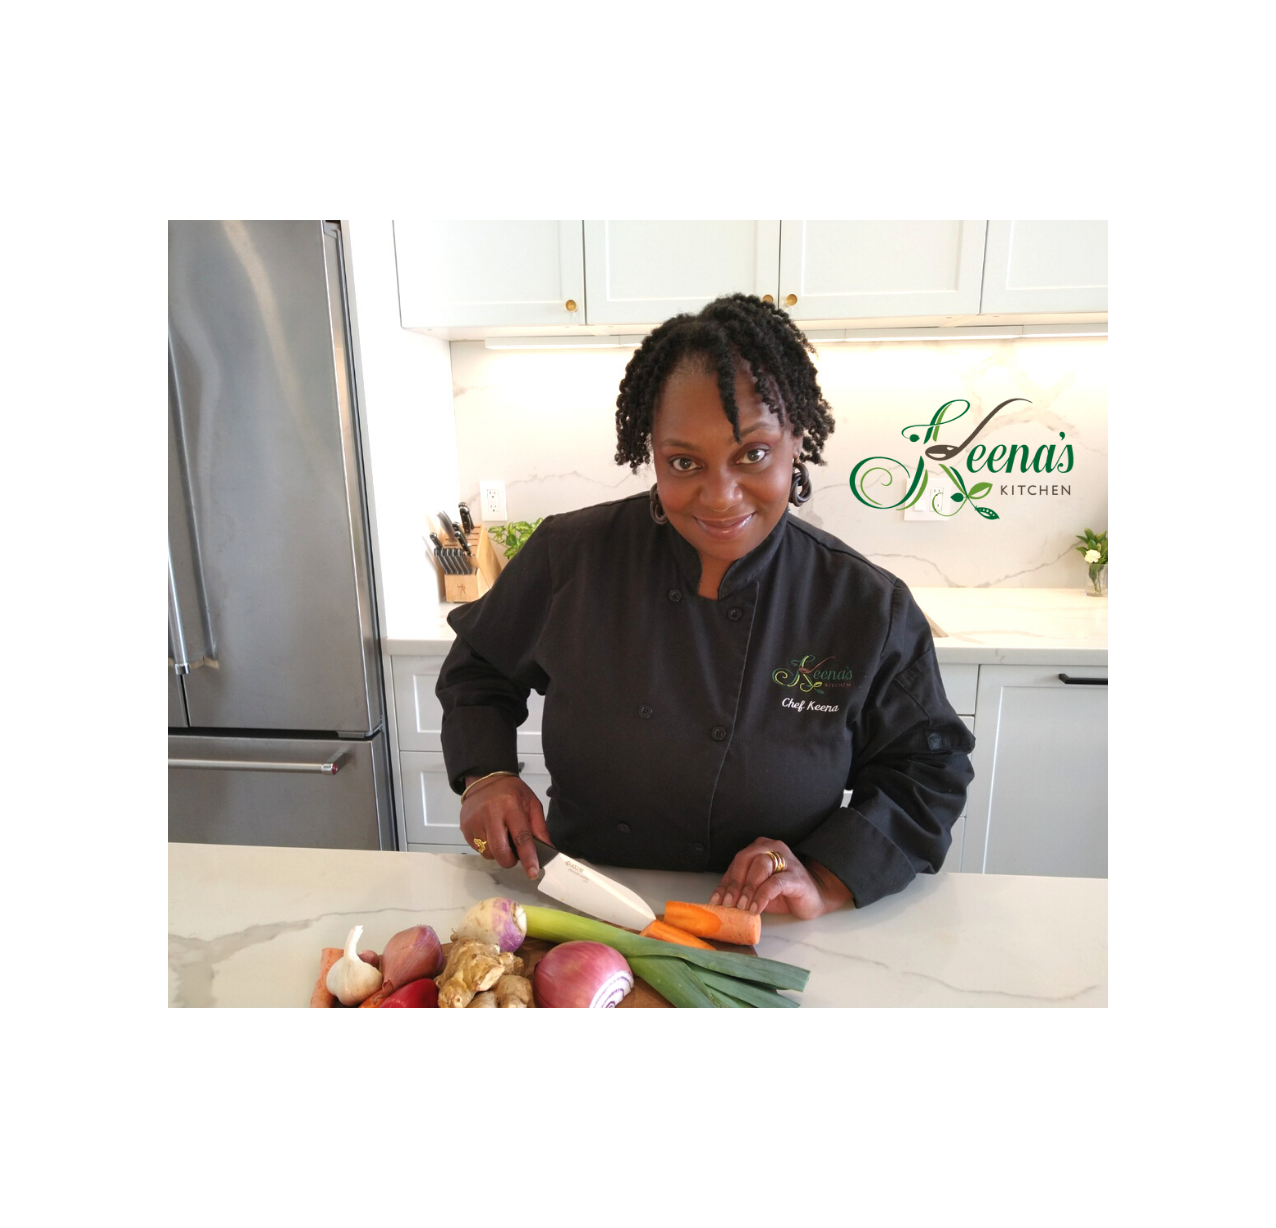 Classically Trained, California Grown - Keena's Kitchen